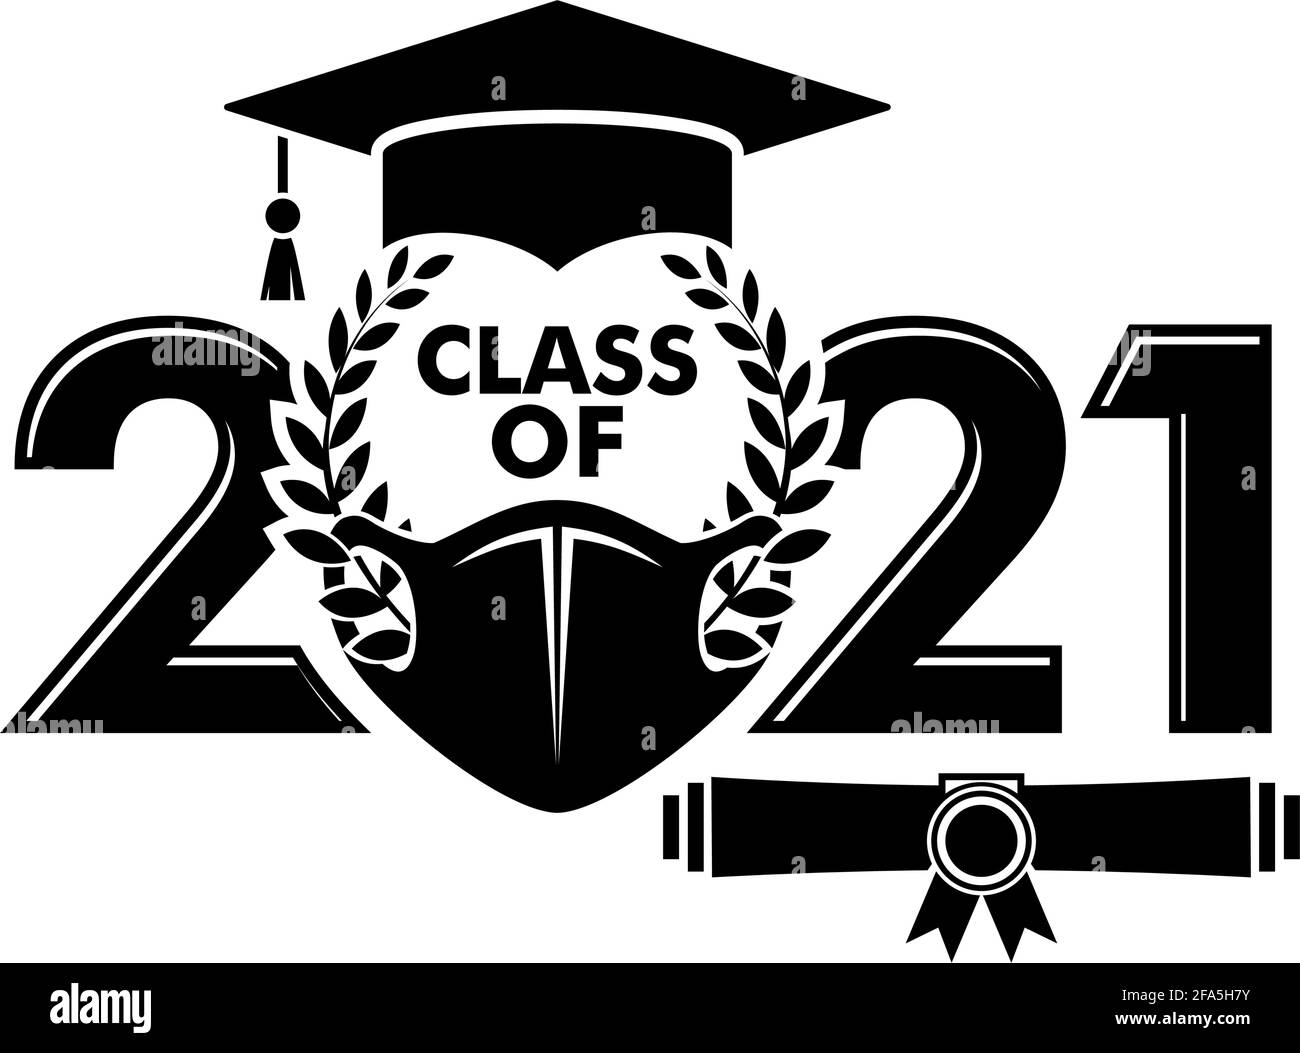 Class of 2021 for greeting, invitation card. Text for graduation design, congratulation event, T-shirt, party, high school or college graduate. Illust Stock Vector